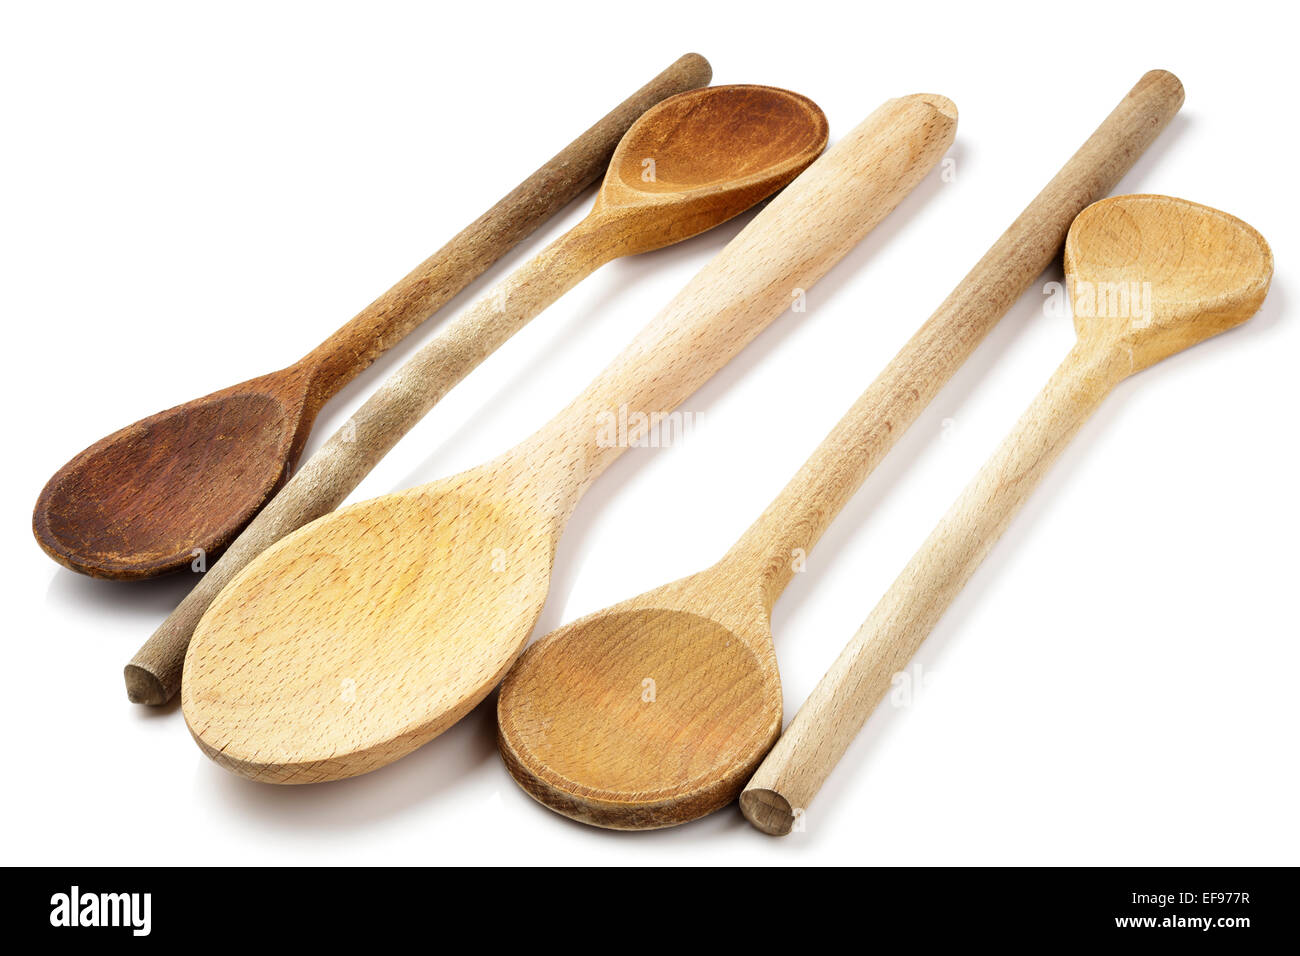 selection of old wooden spoons Stock Photo